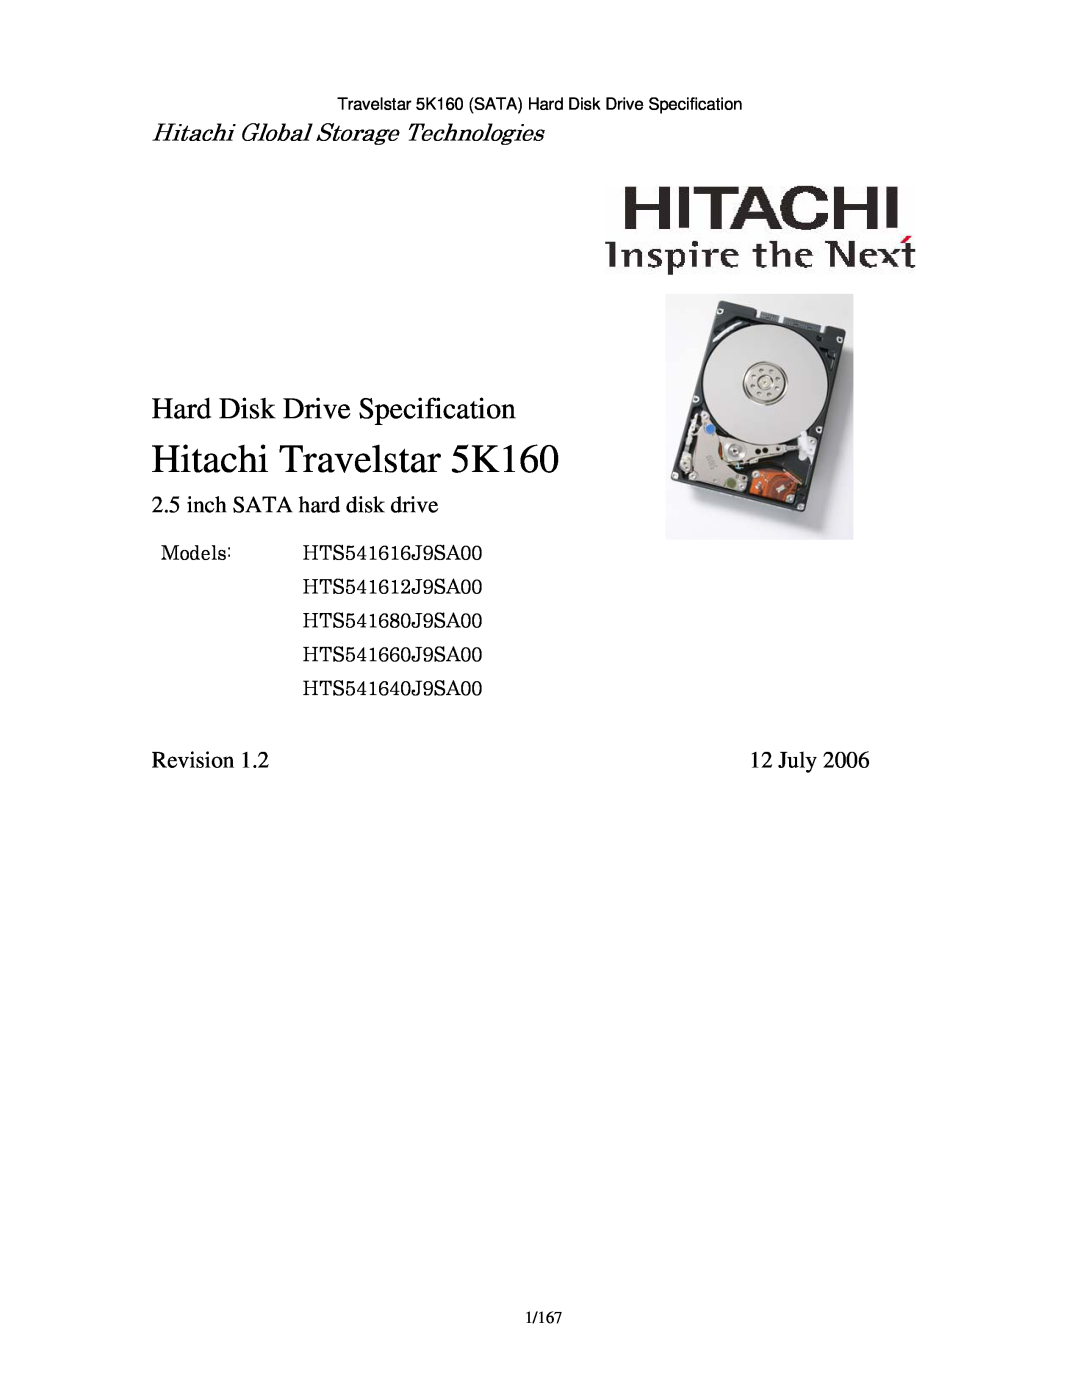 Hitachi HTS541680J9SA00 manual Highlights, Applications, Features and Benefits, Bulk Data Encryption, Feature / Function 